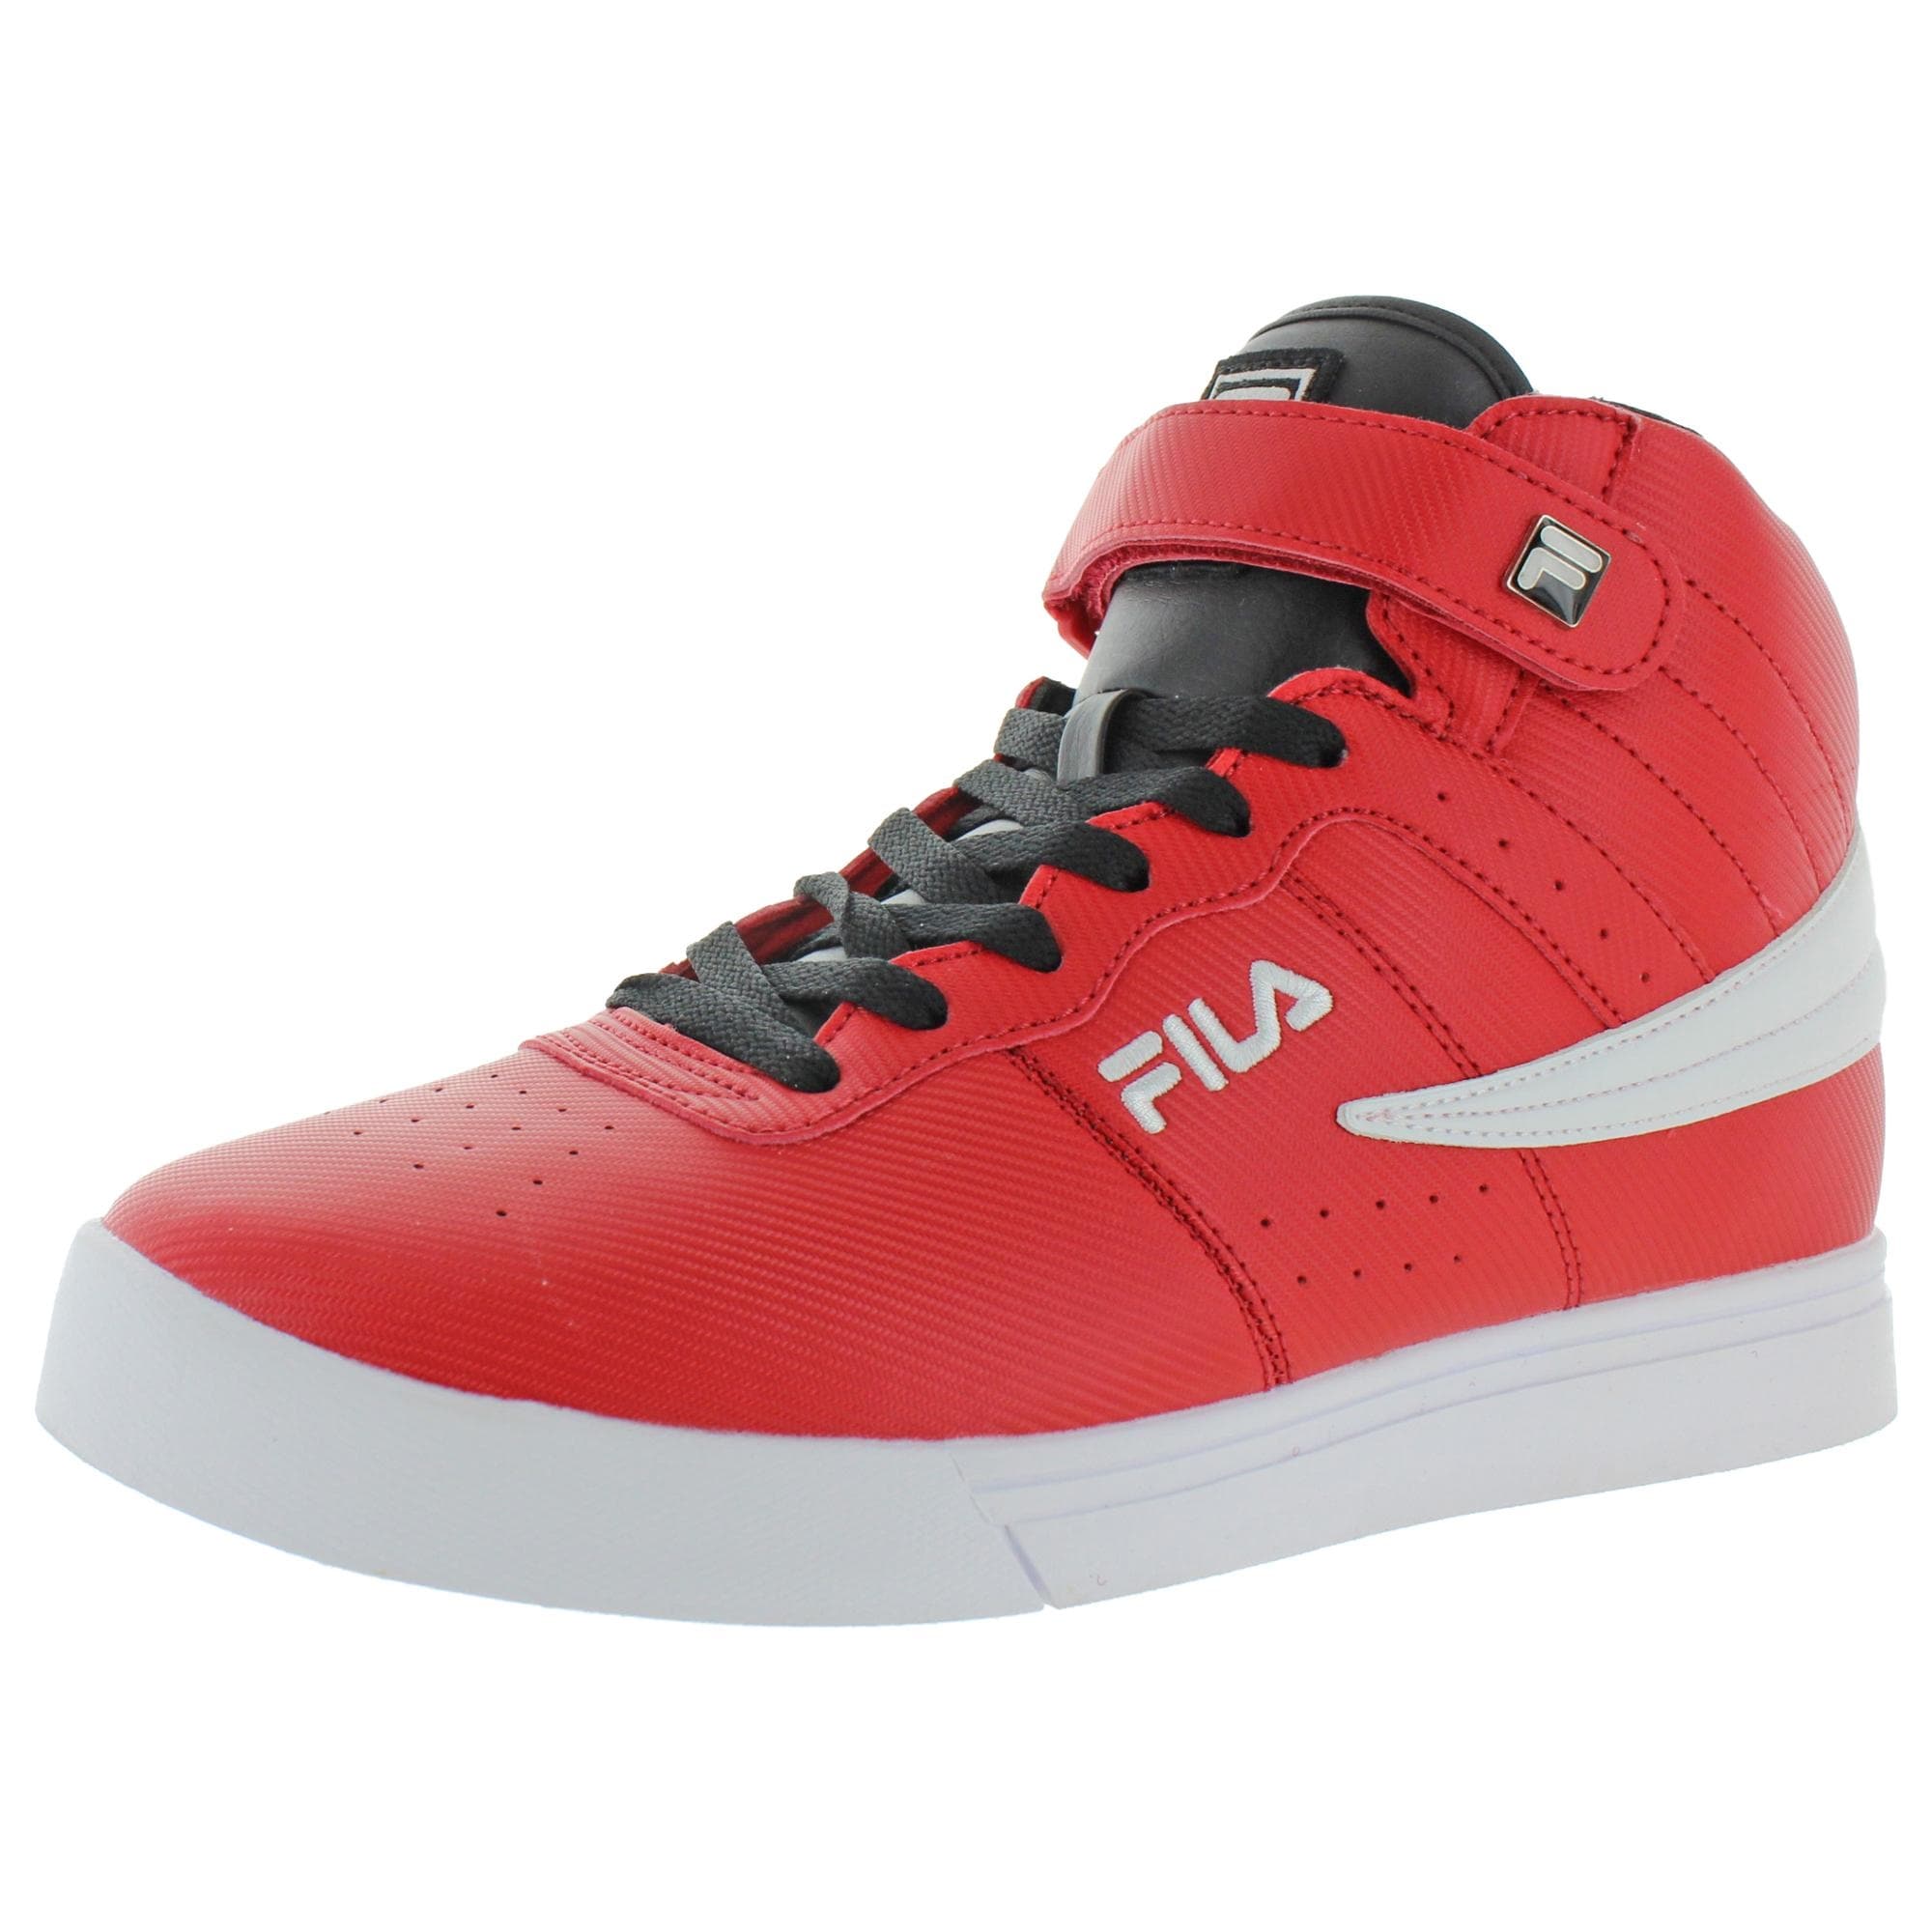 red high top mens shoes